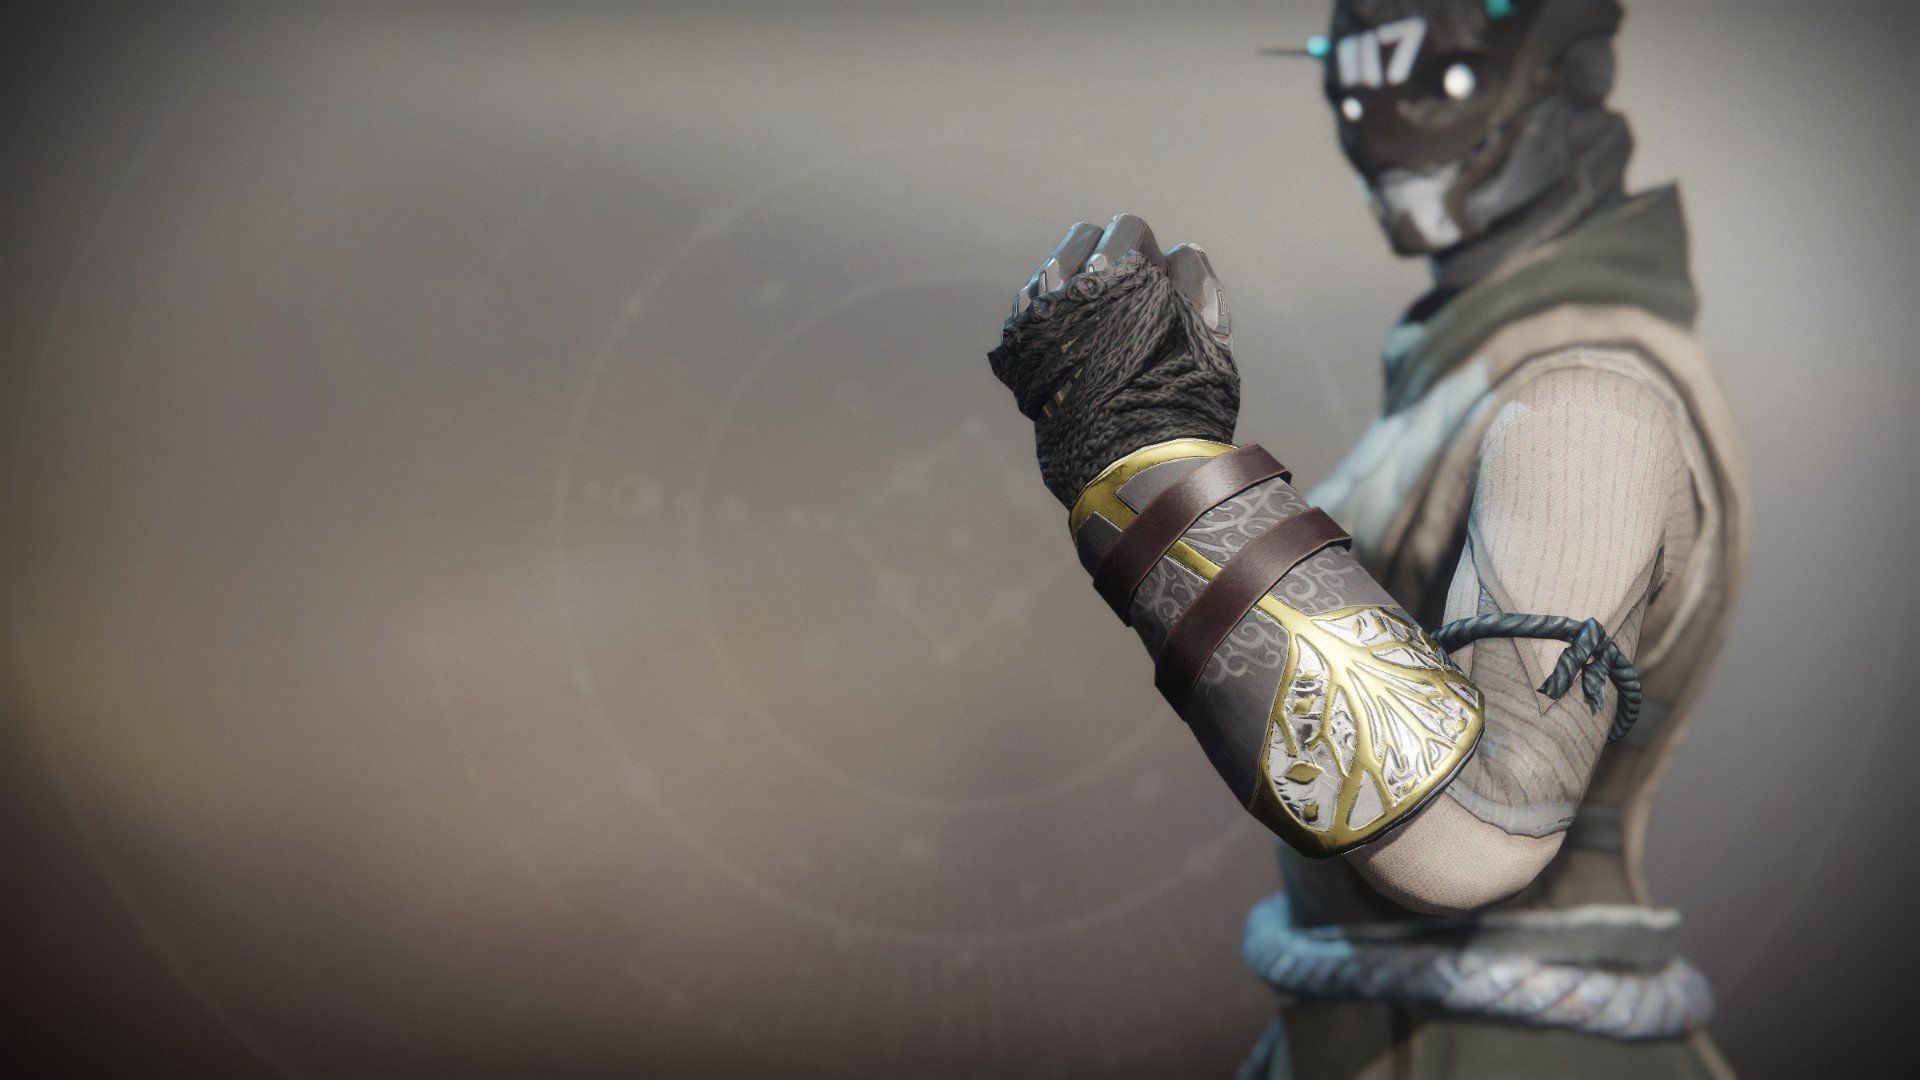 An in-game render of the Iron Truage Gloves.